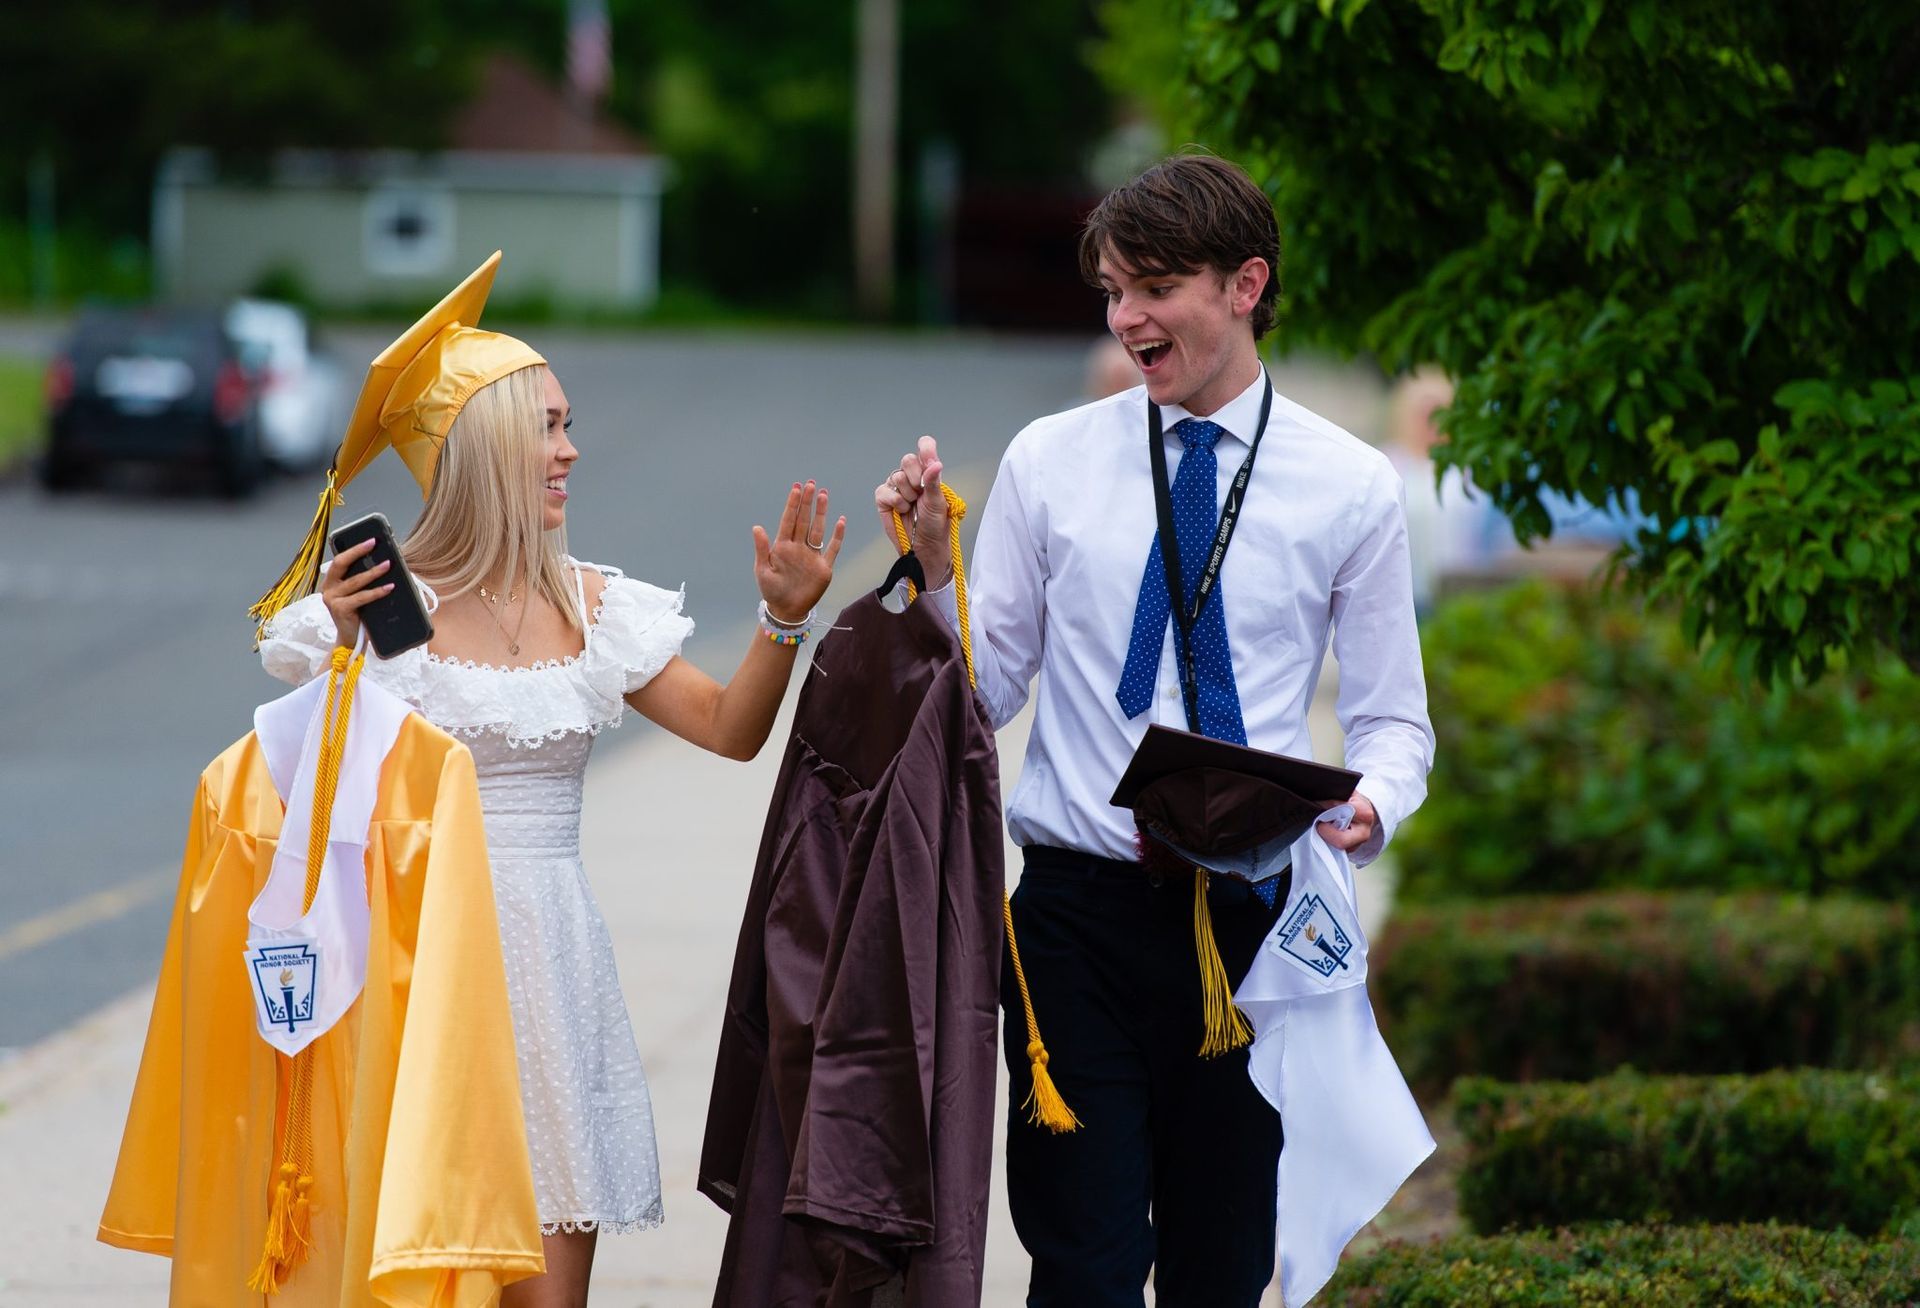 a man and a woman in graduation caps and gowns are walking down a sidewalk .